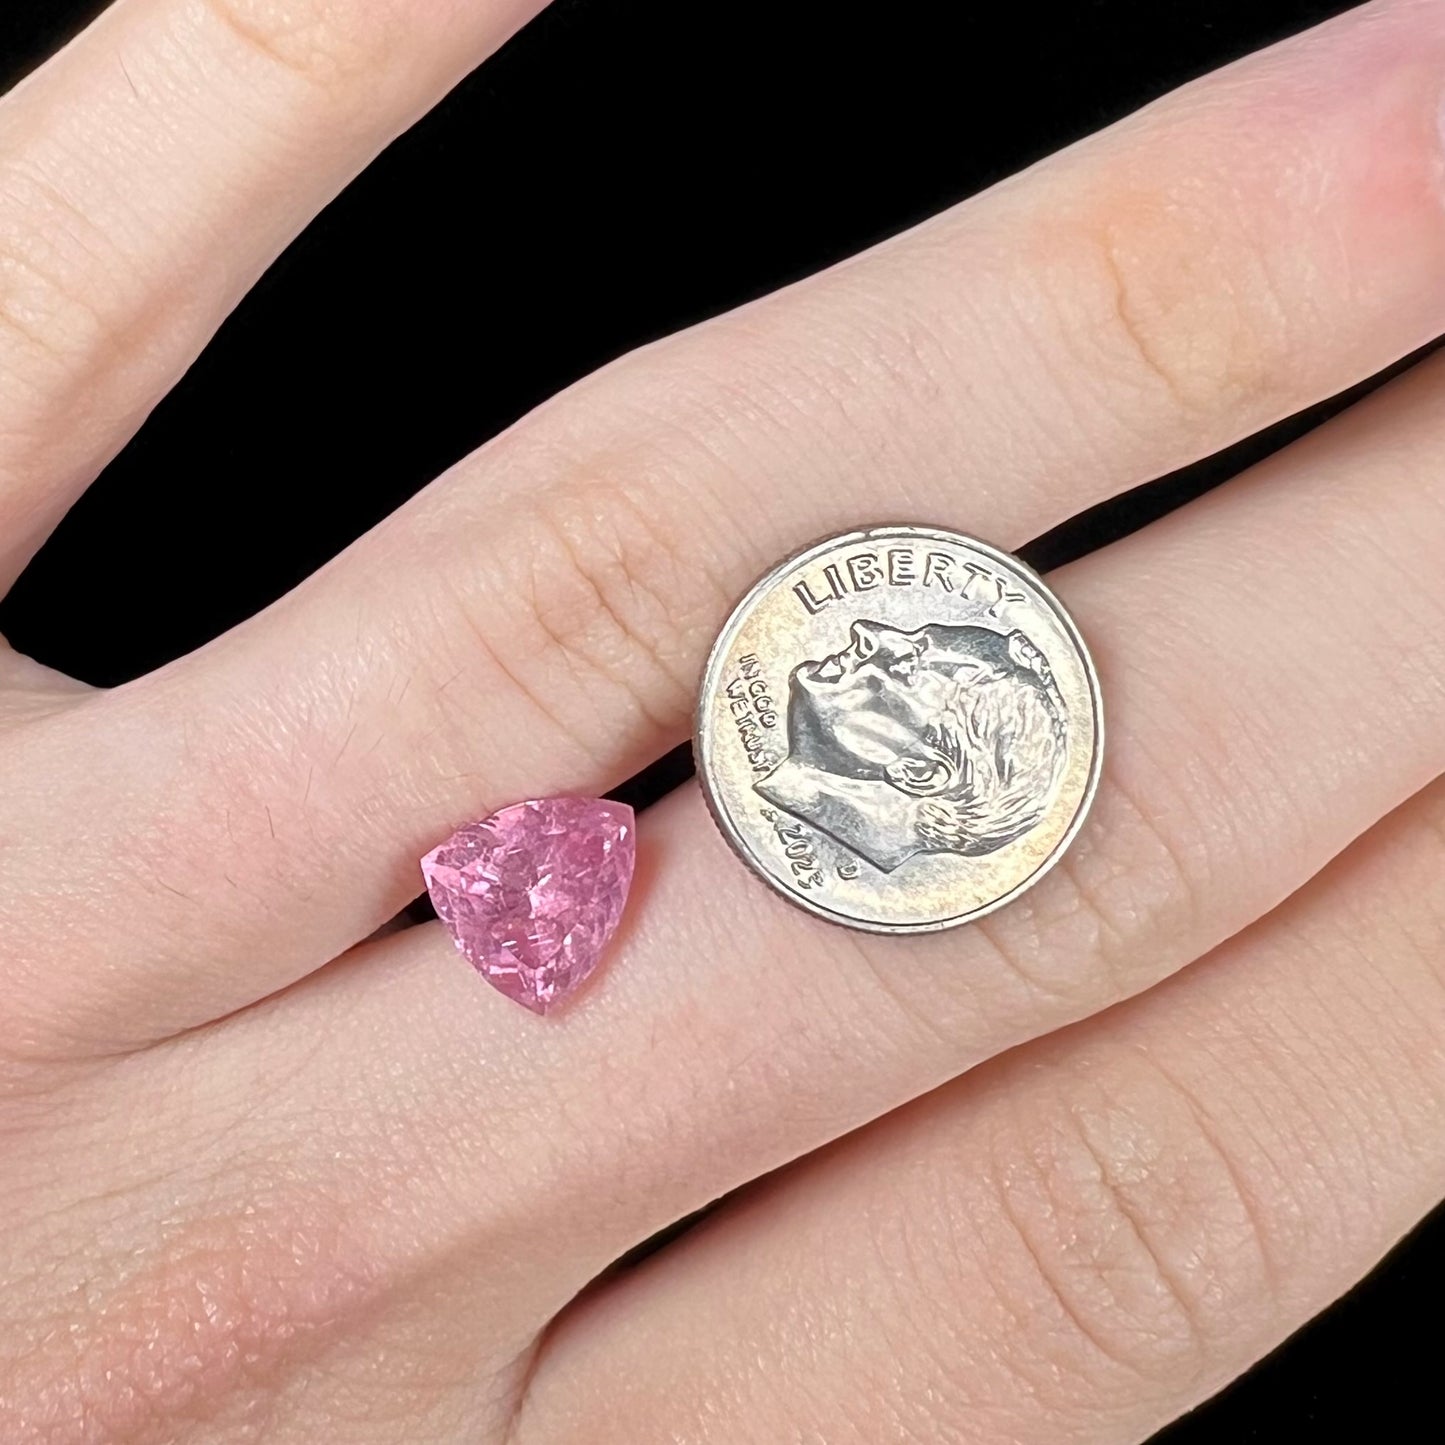 A loose, faceted trillion cut pink touramline gemstone.  The stone is a light bubblegum pink color.